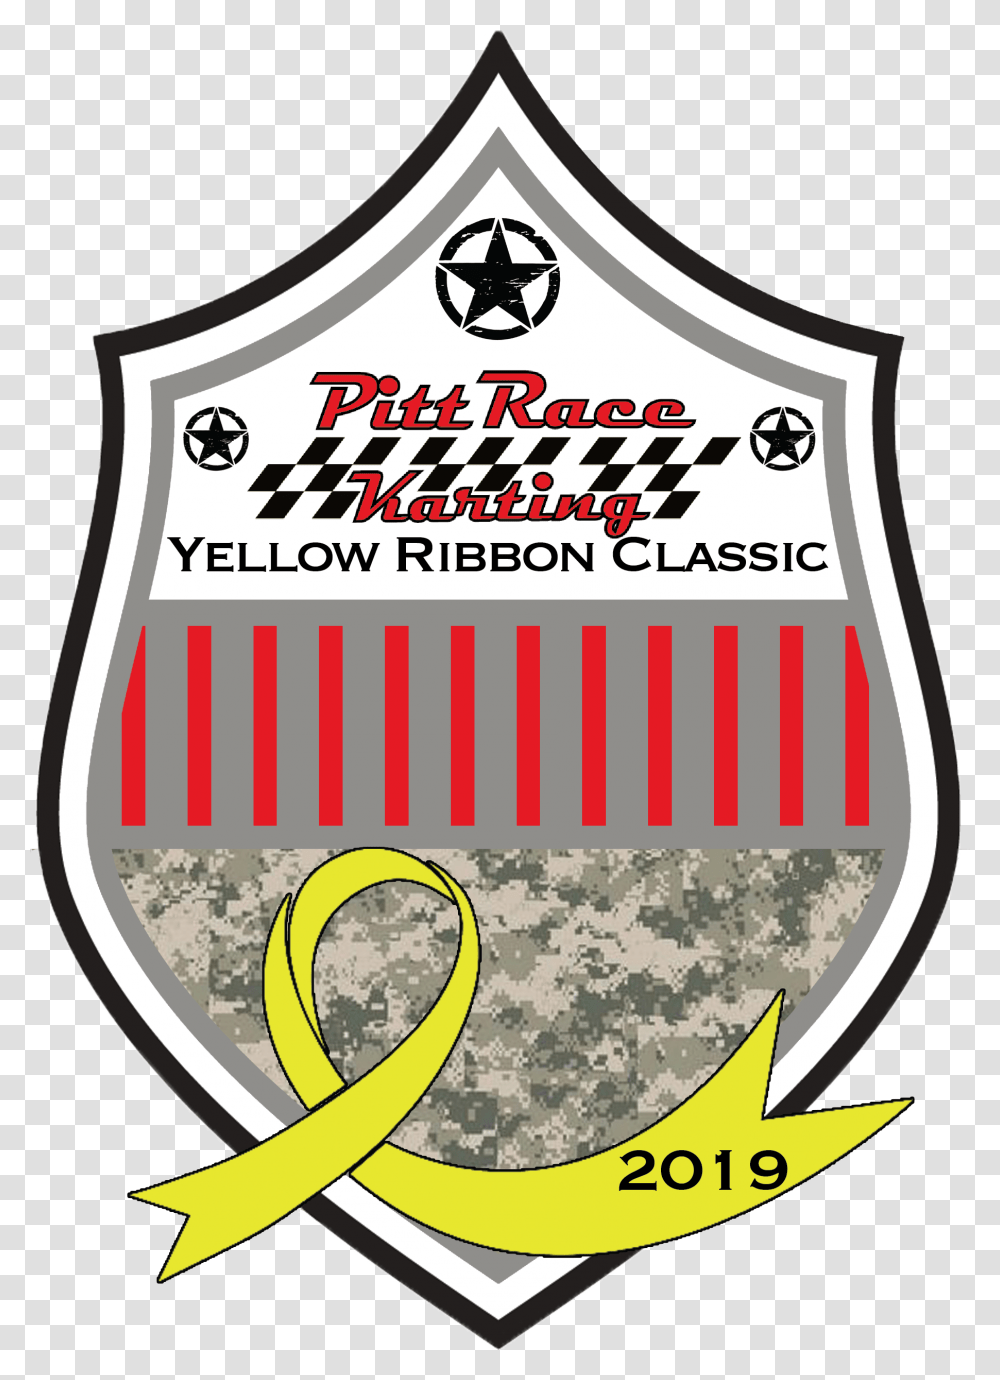 Yellow Ribbon Classic Karting Enduro 1pm 4pm Pittrace Label, Armor, Shield, Poster, Advertisement Transparent Png